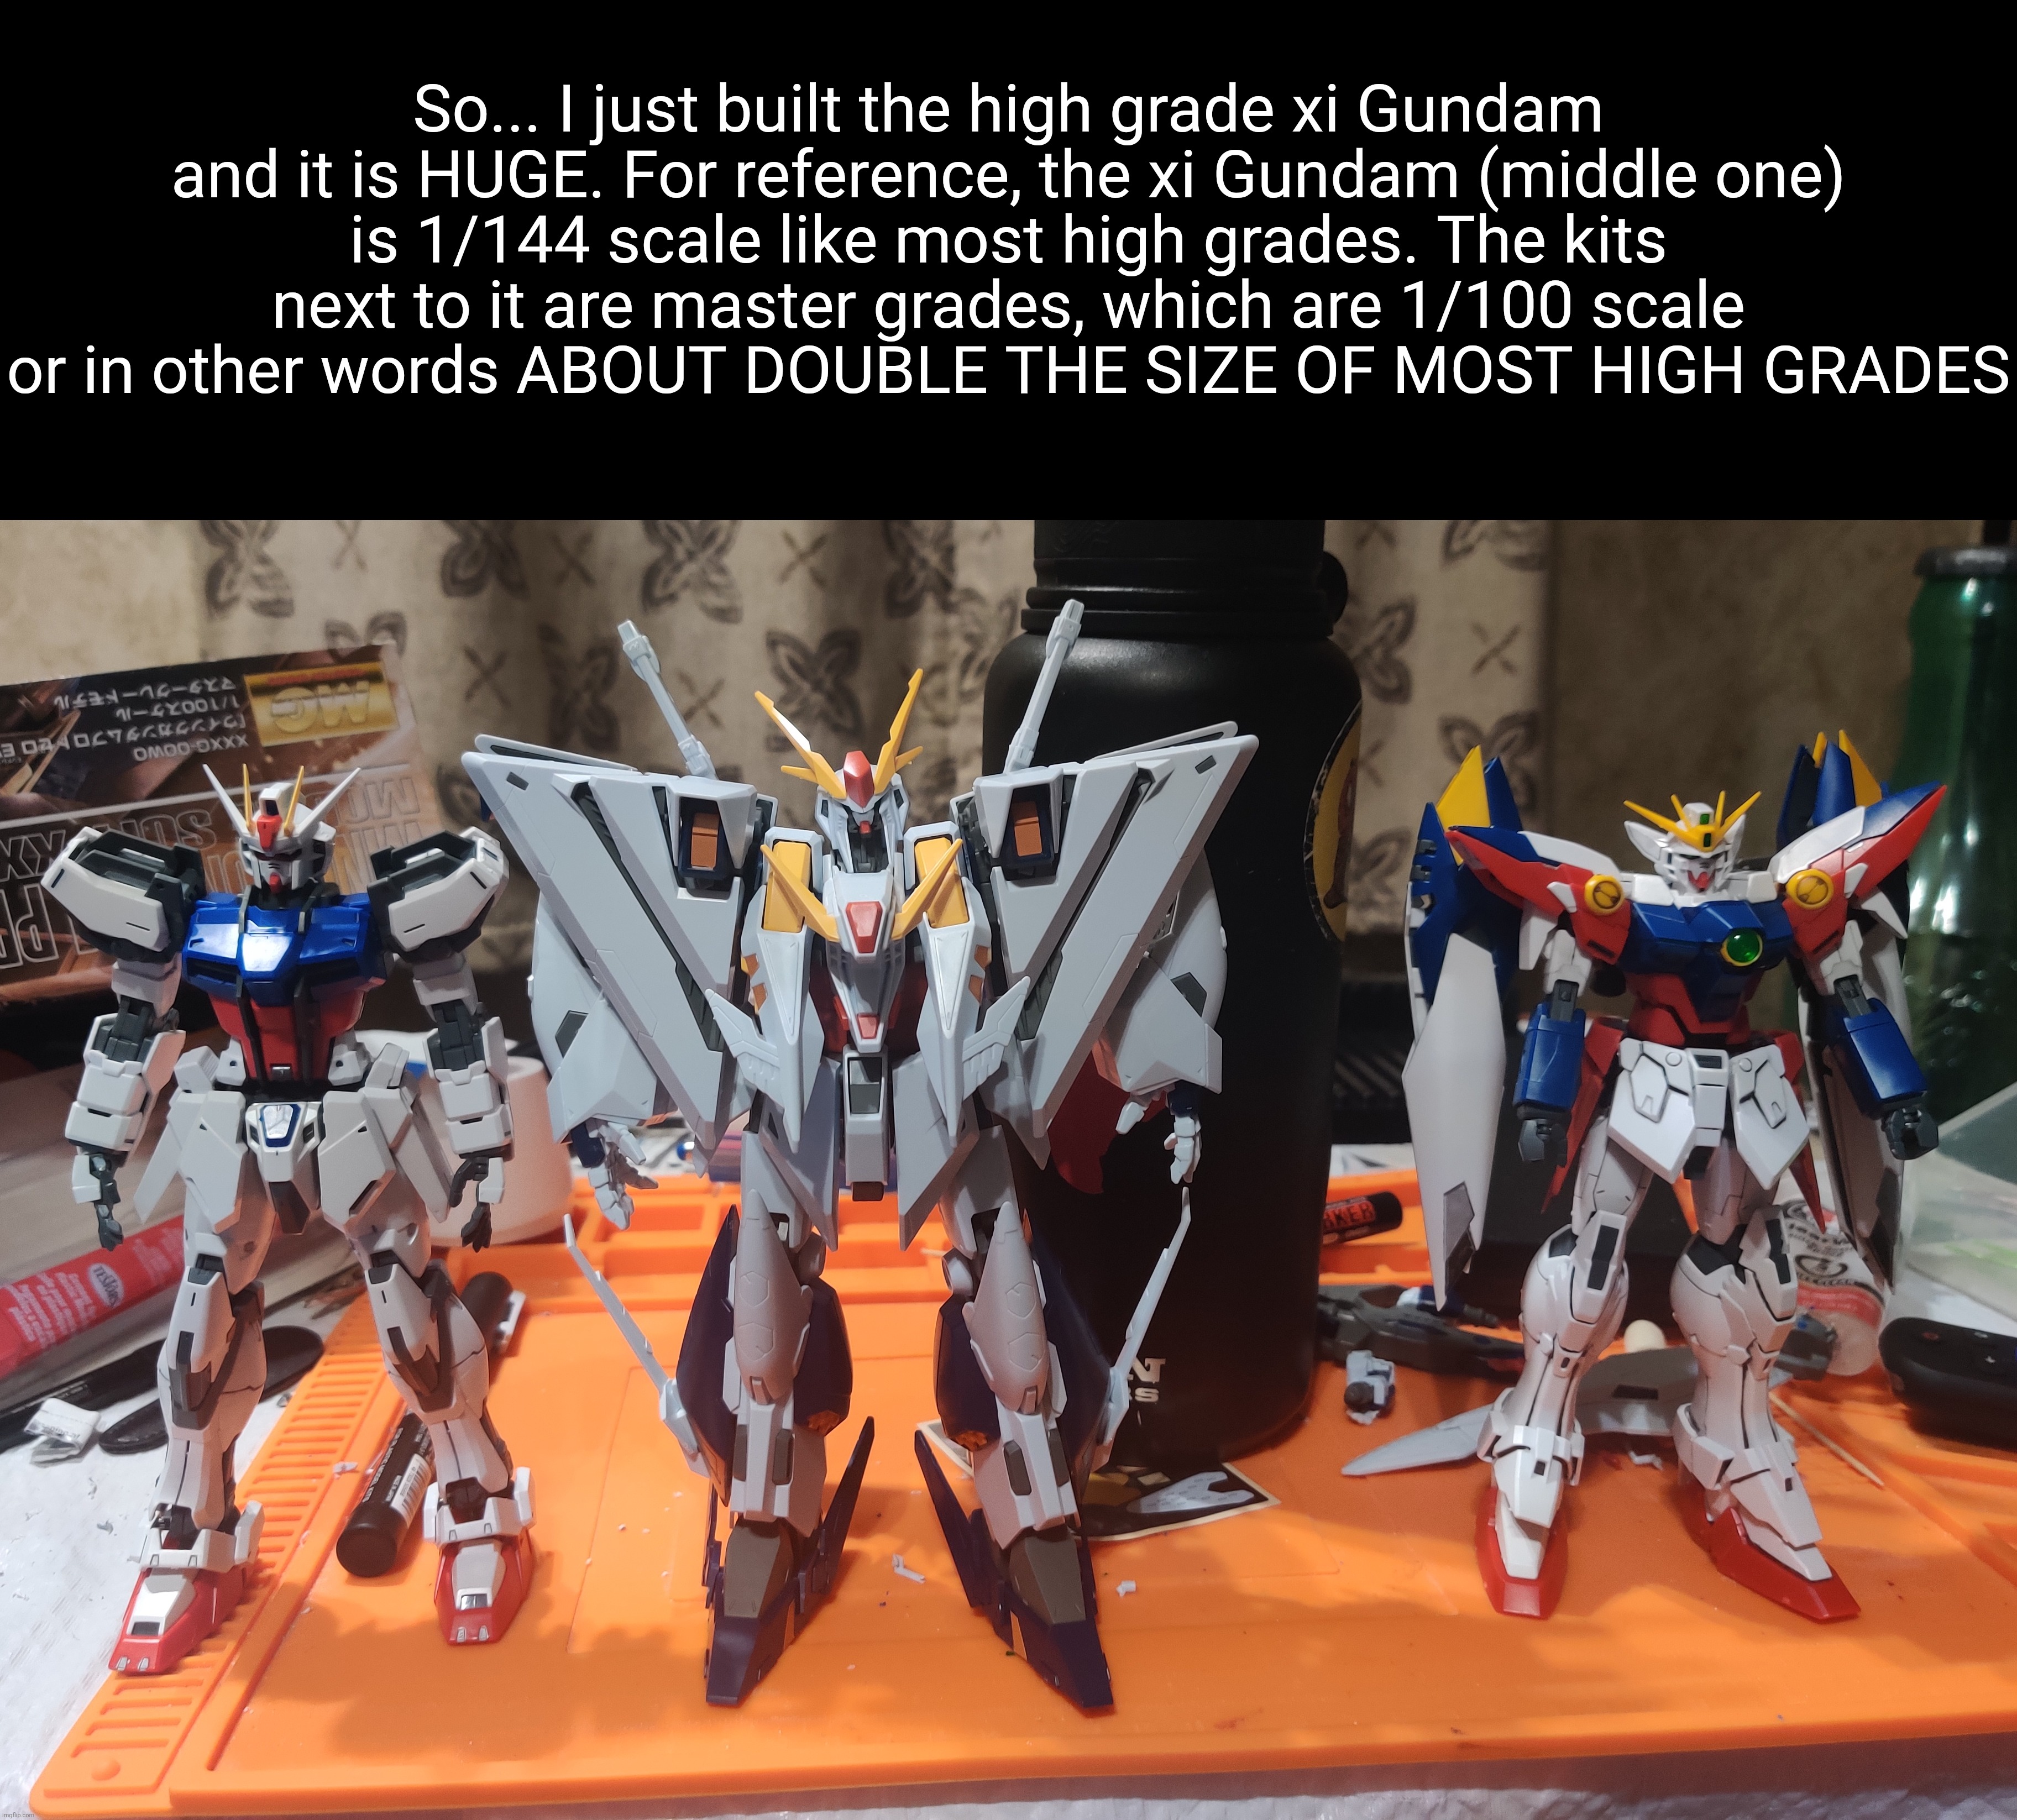 Haven't panel-lined it yet, and honestly I'm afraid to. | So... I just built the high grade xi Gundam and it is HUGE. For reference, the xi Gundam (middle one)
is 1/144 scale like most high grades. The kits next to it are master grades, which are 1/100 scale or in other words ABOUT DOUBLE THE SIZE OF MOST HIGH GRADES | made w/ Imgflip meme maker